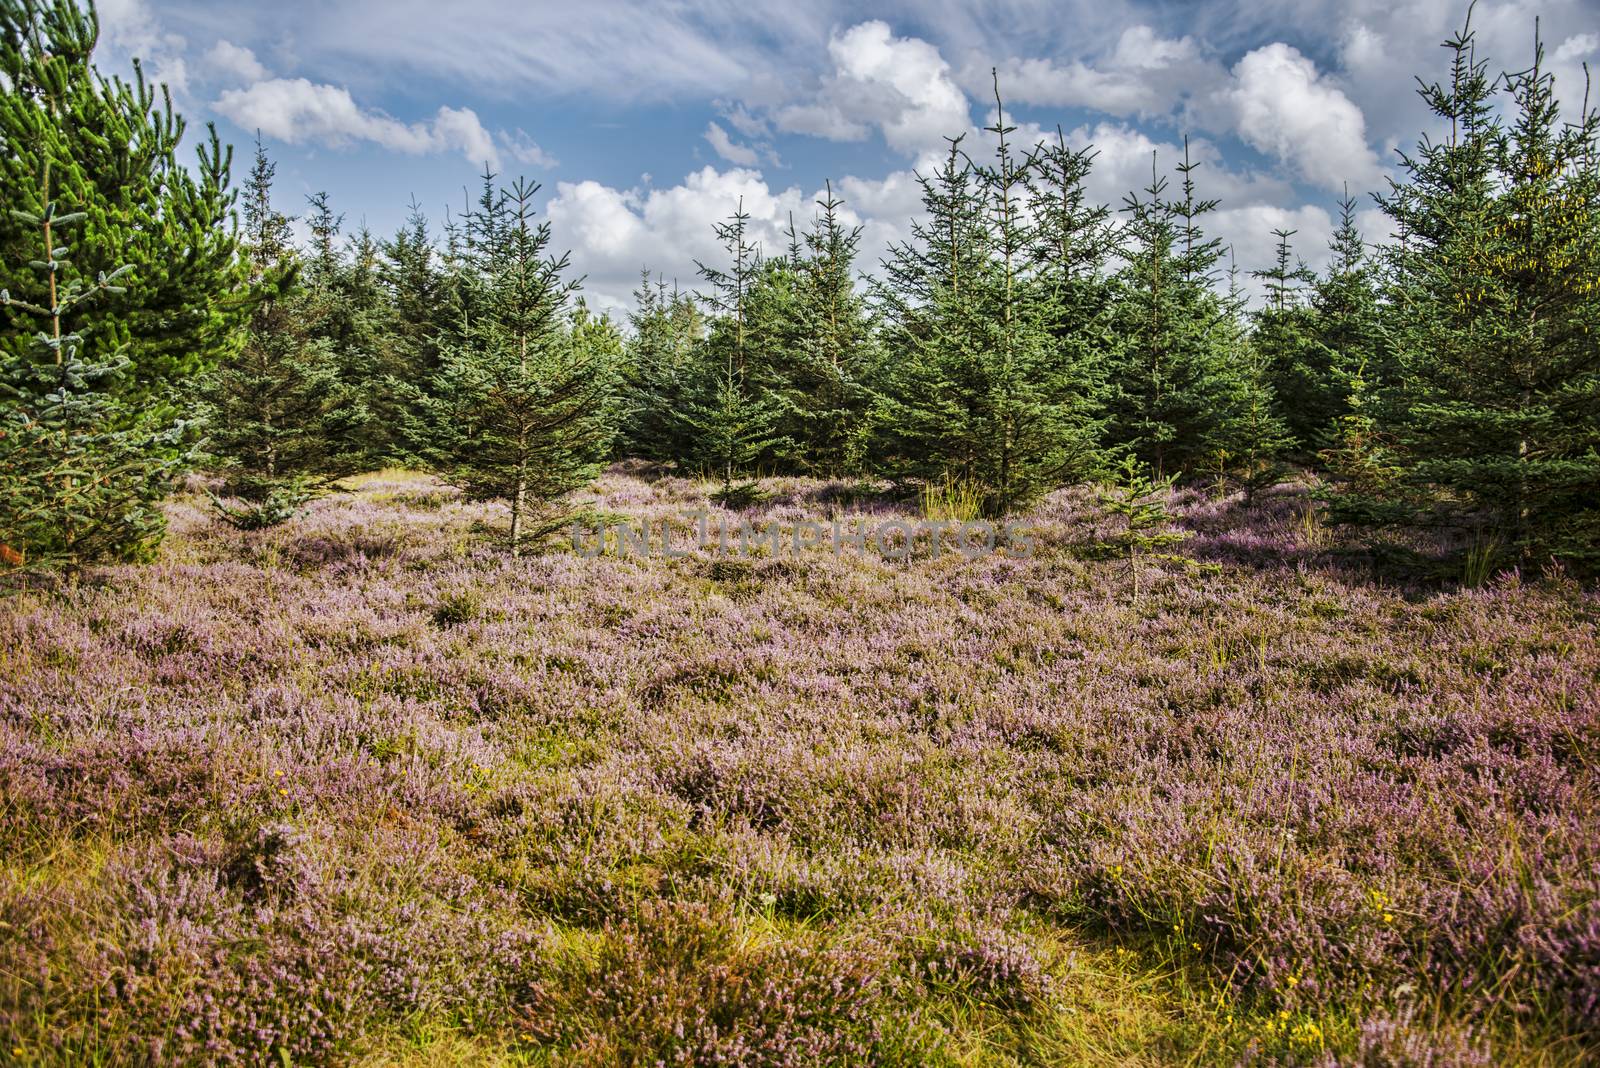 A pine forest with a floor of purple heather